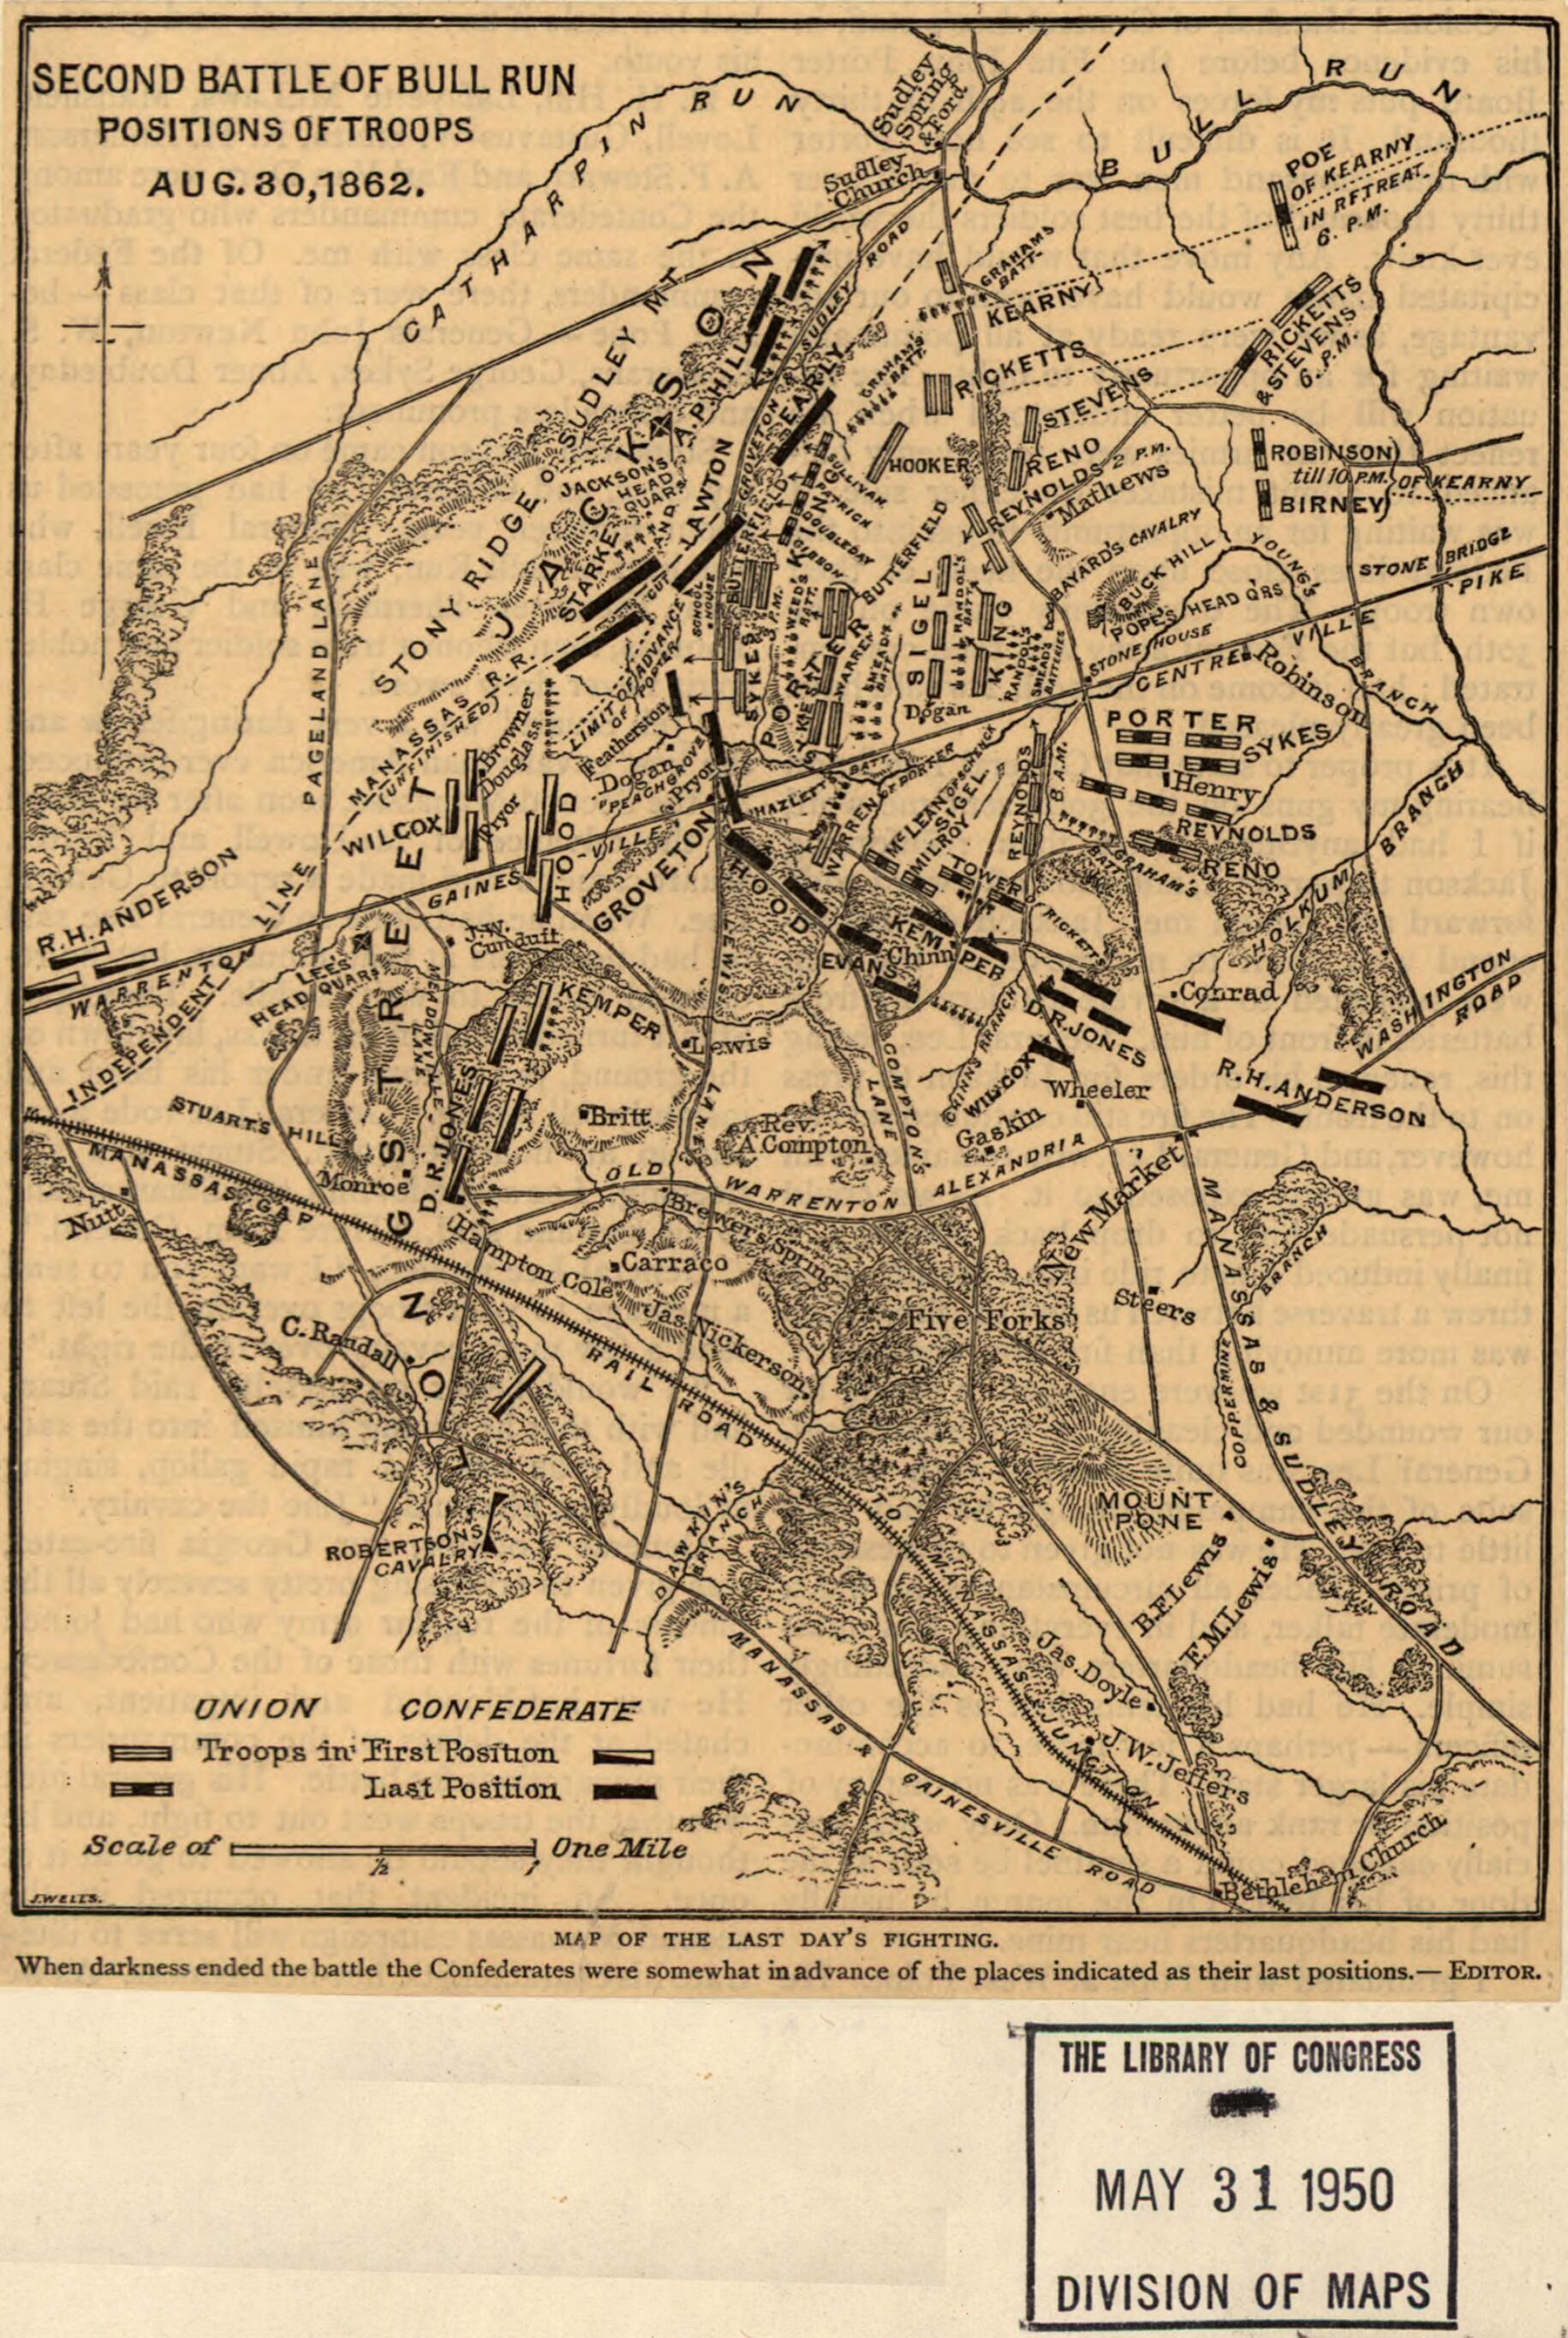 This old map of Second Battle of Bull Run. Positions of Troops Aug. 30, 1862 from 1886 was created by Jacob Wells in 1886